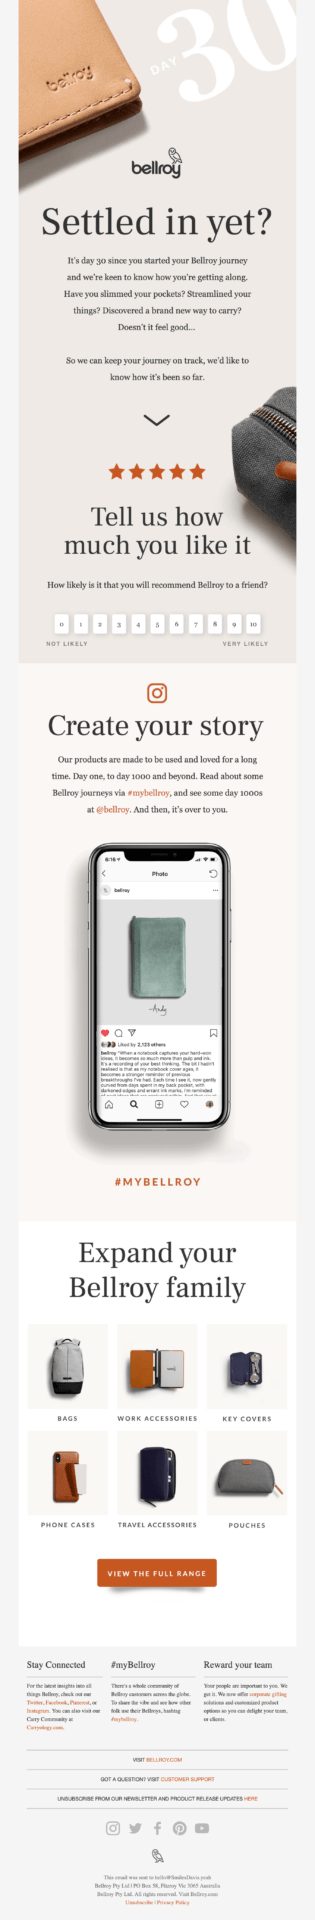  Survey email marketing example: Bellroy